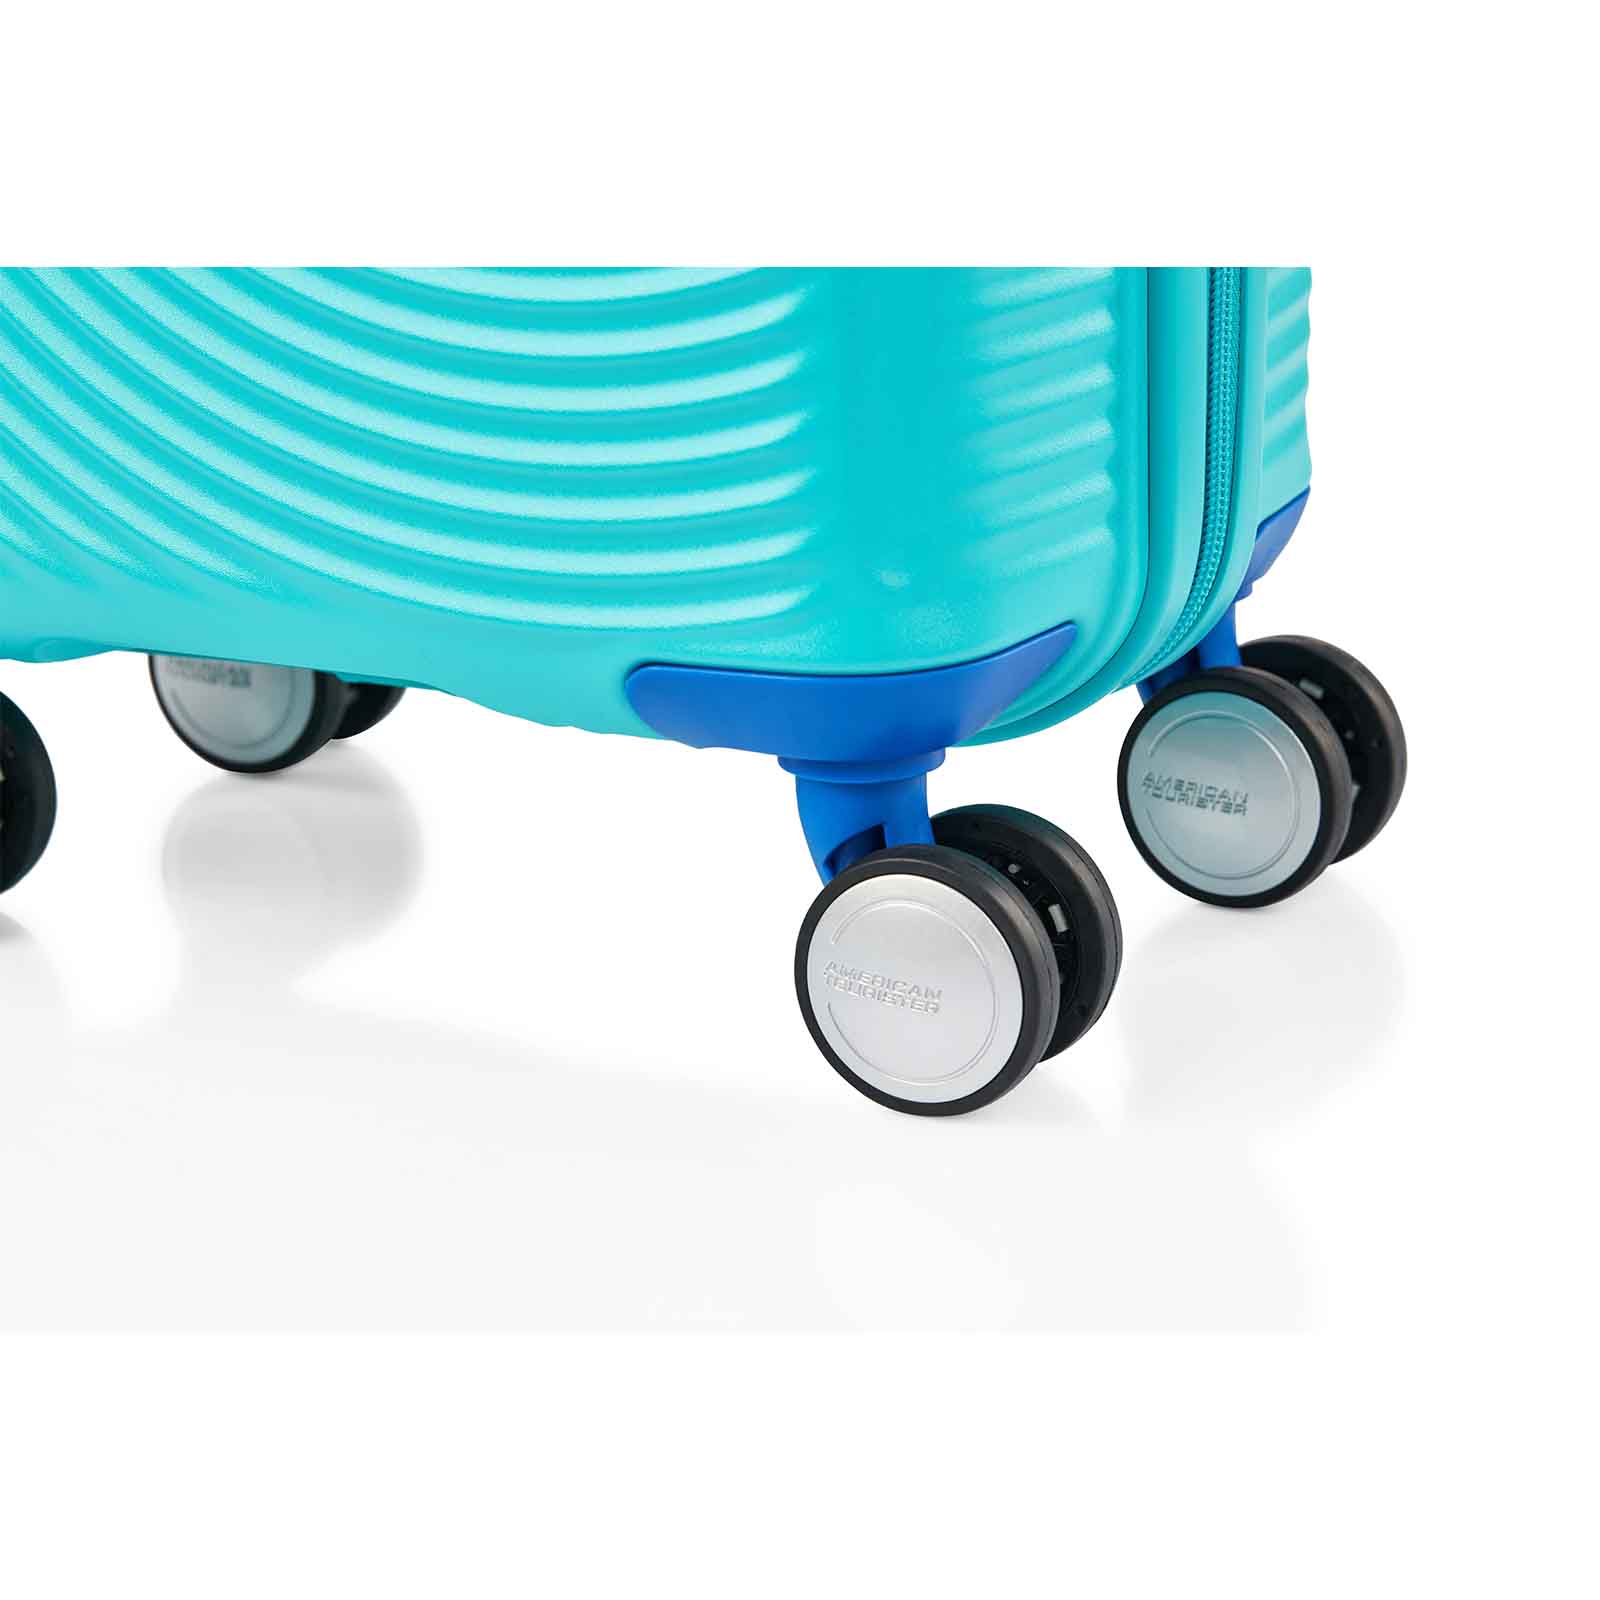 American-Tourister-Little-Curio-47cm-Carry-On-Suitcase-Teal-Blue-Wheels